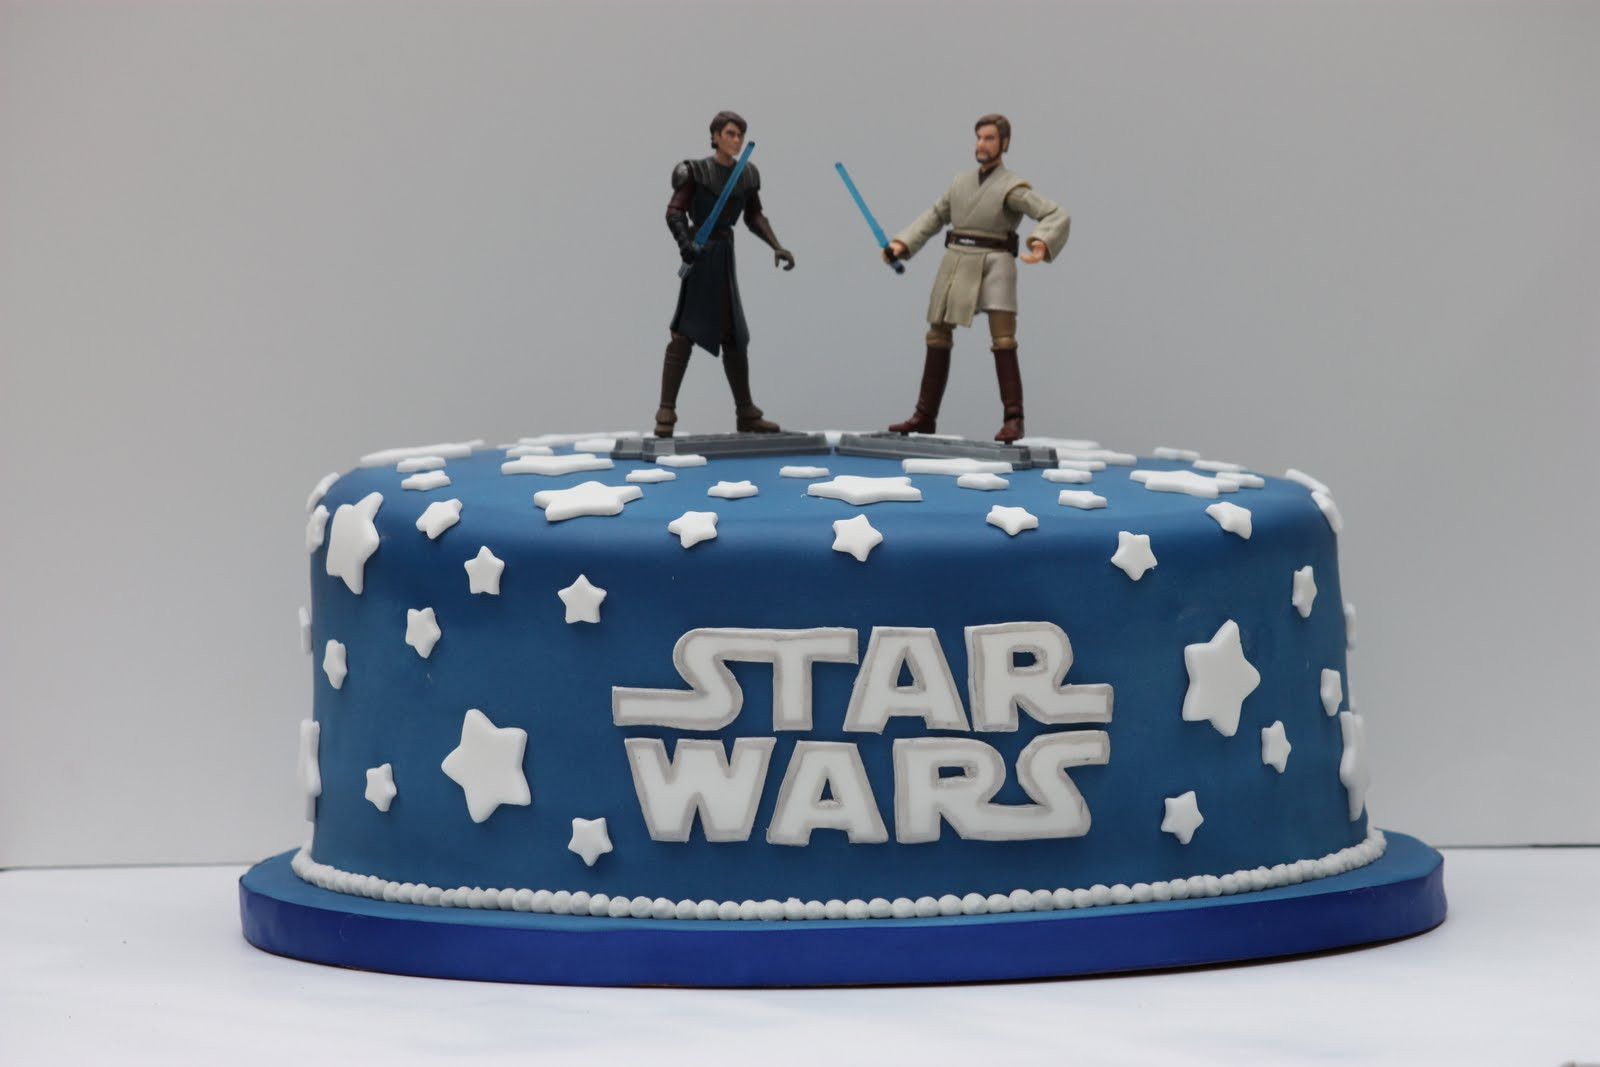 Star Wars Birthday Cake Ideas
 Whimsical by Design Ryan s Star Wars Birthday Cake